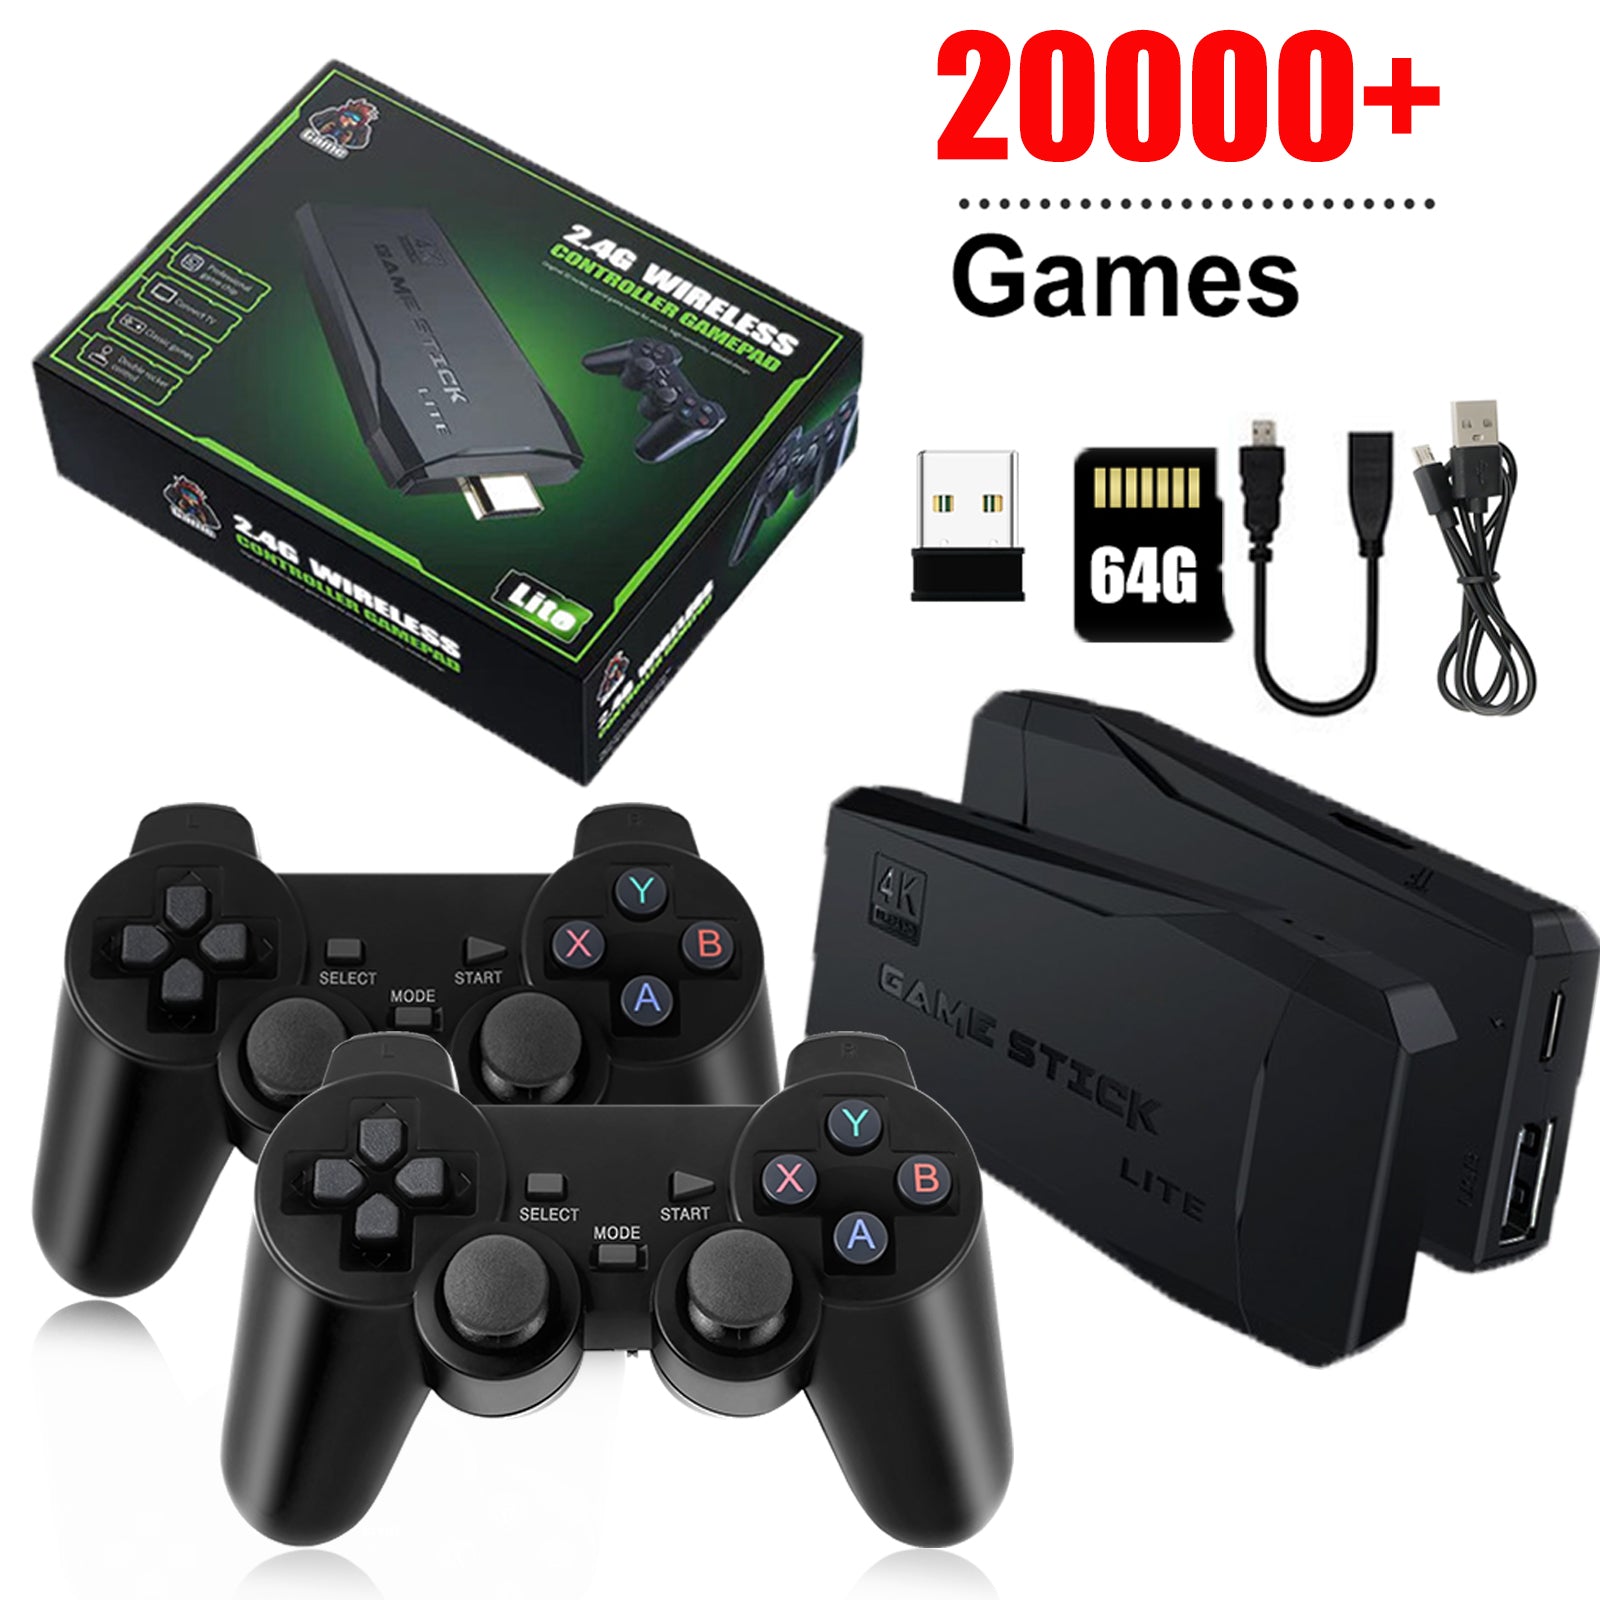 M8 Game 4k Game With 64gb Games Tf Card For 20000+ Games And Two Game Controllers Rk3228 Ram 256mb,rom 128mb